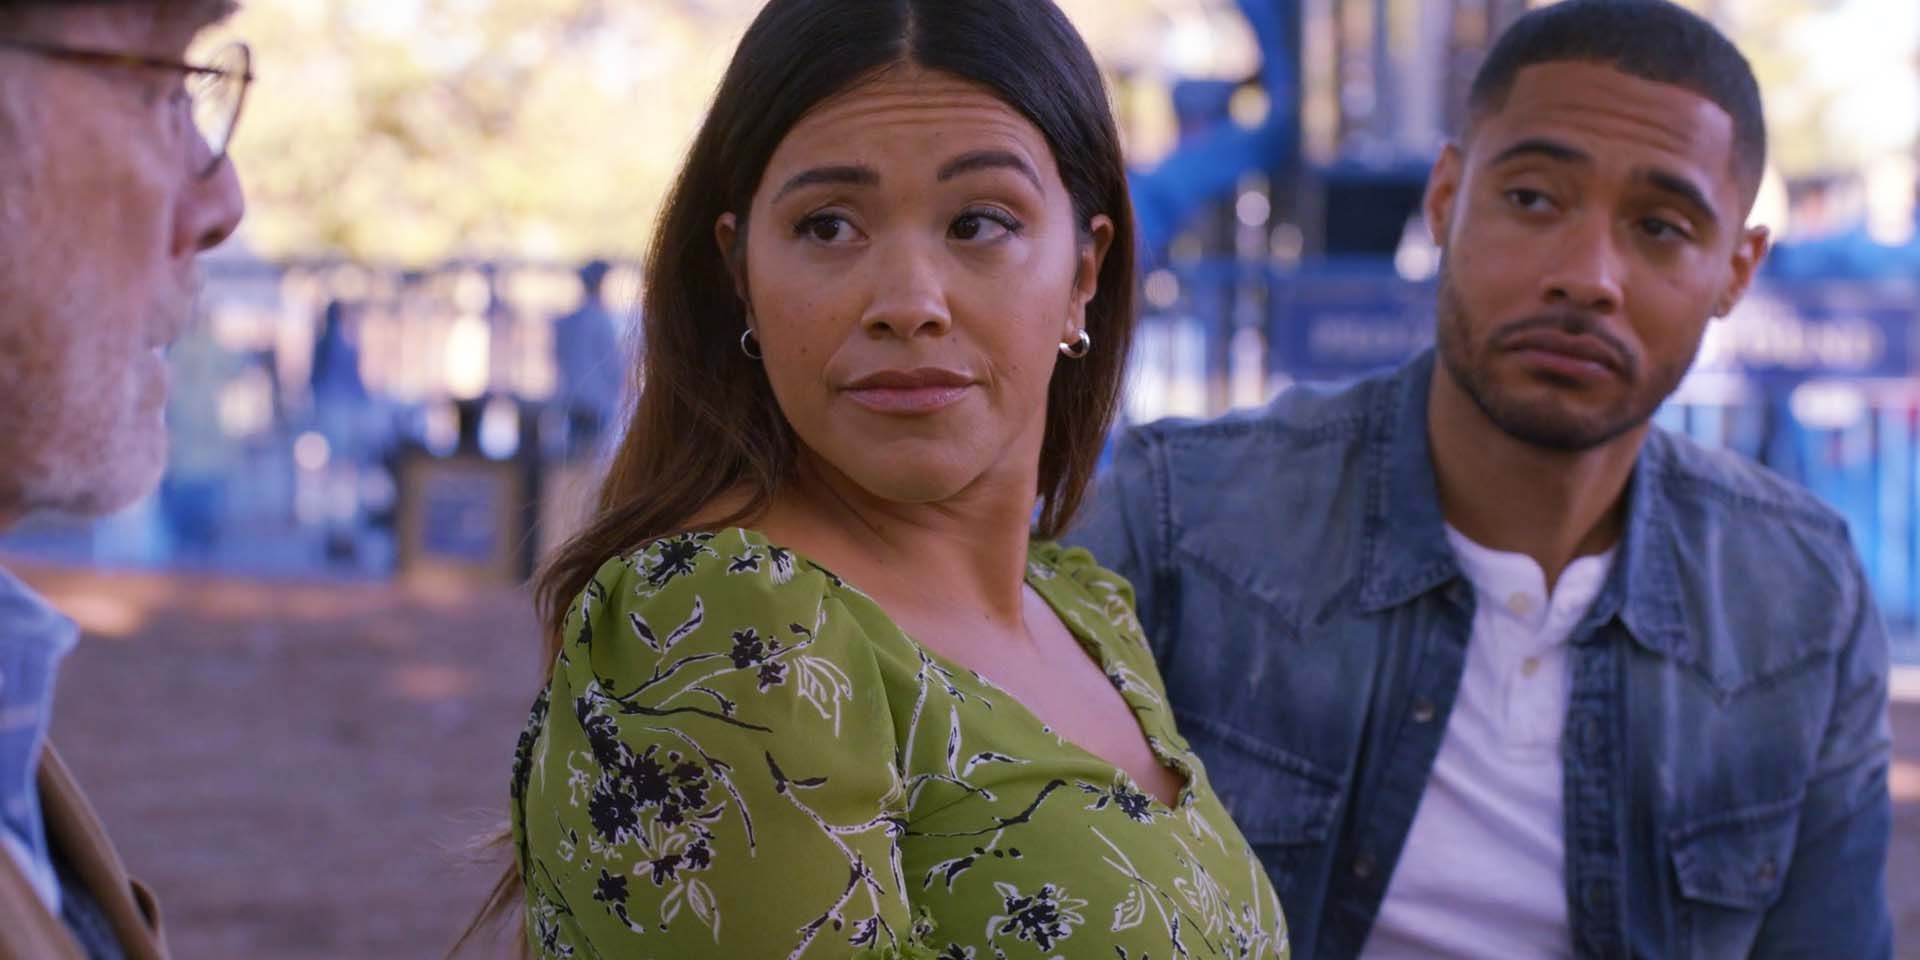 Gina Rodriguez as Nell, and Langston Kerman as Jesse in Not Dead Yet episode 5